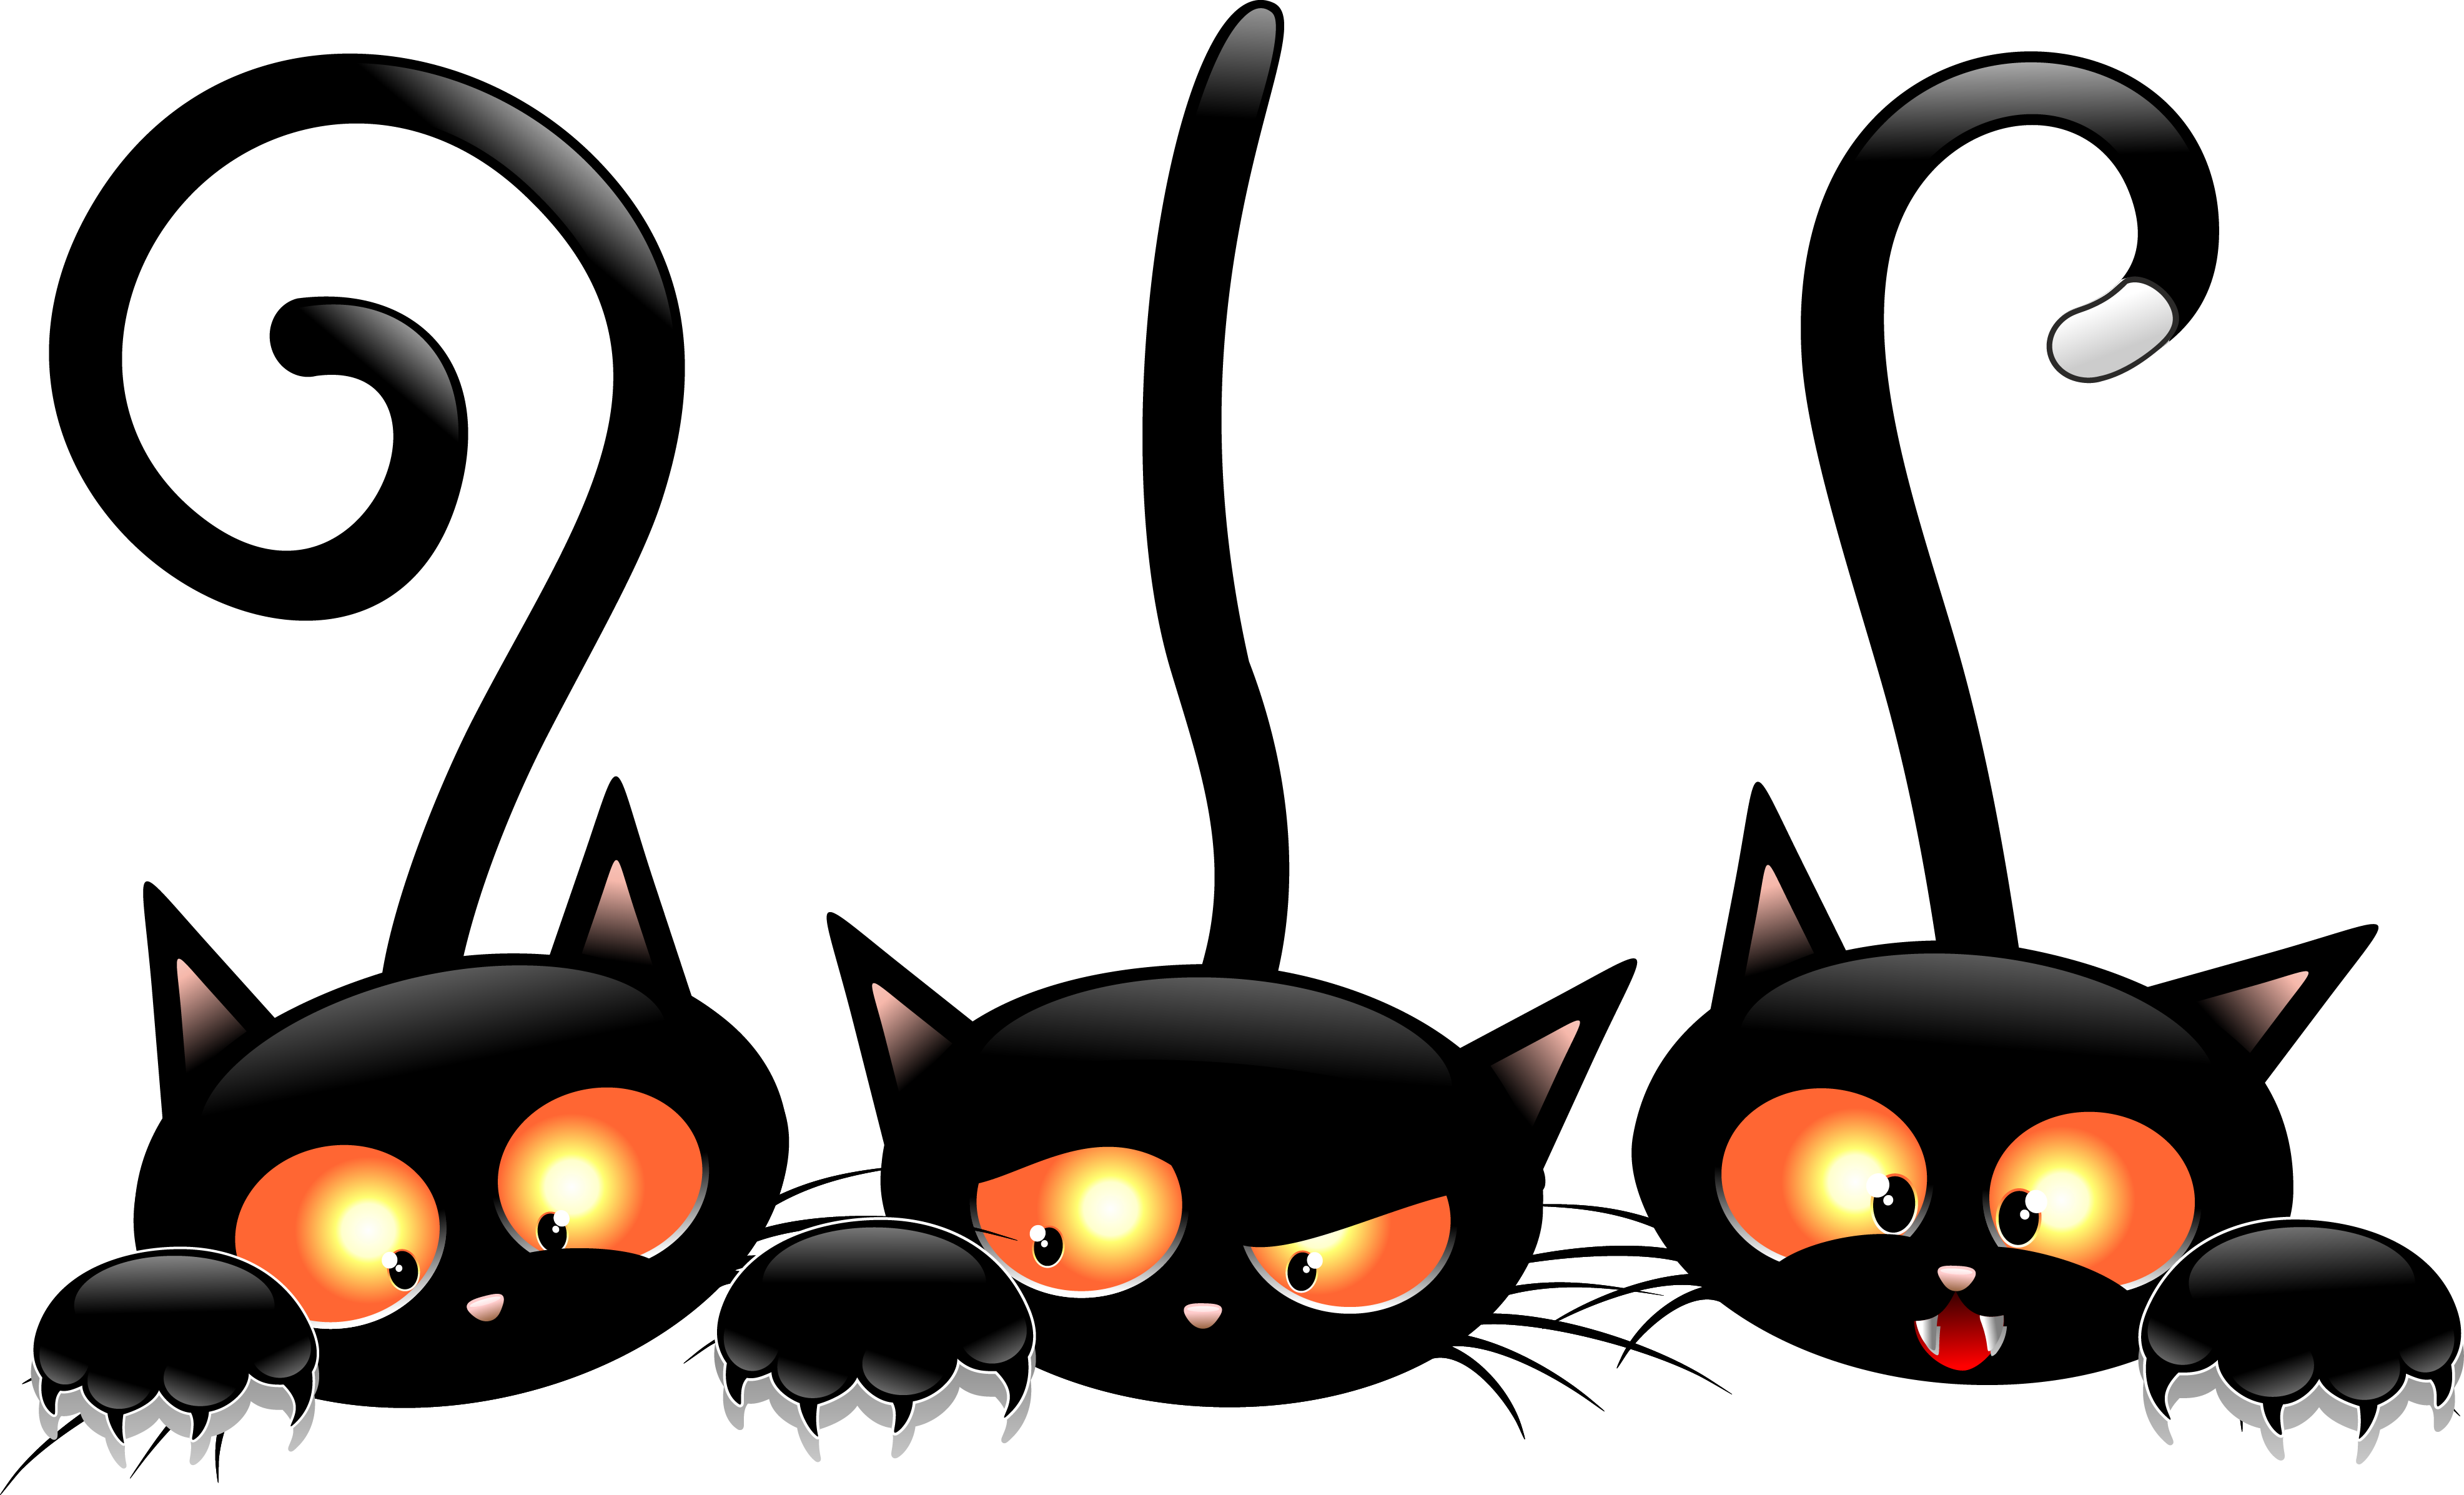 Medium Cartoon Sized To Cats Black Small PNG Image